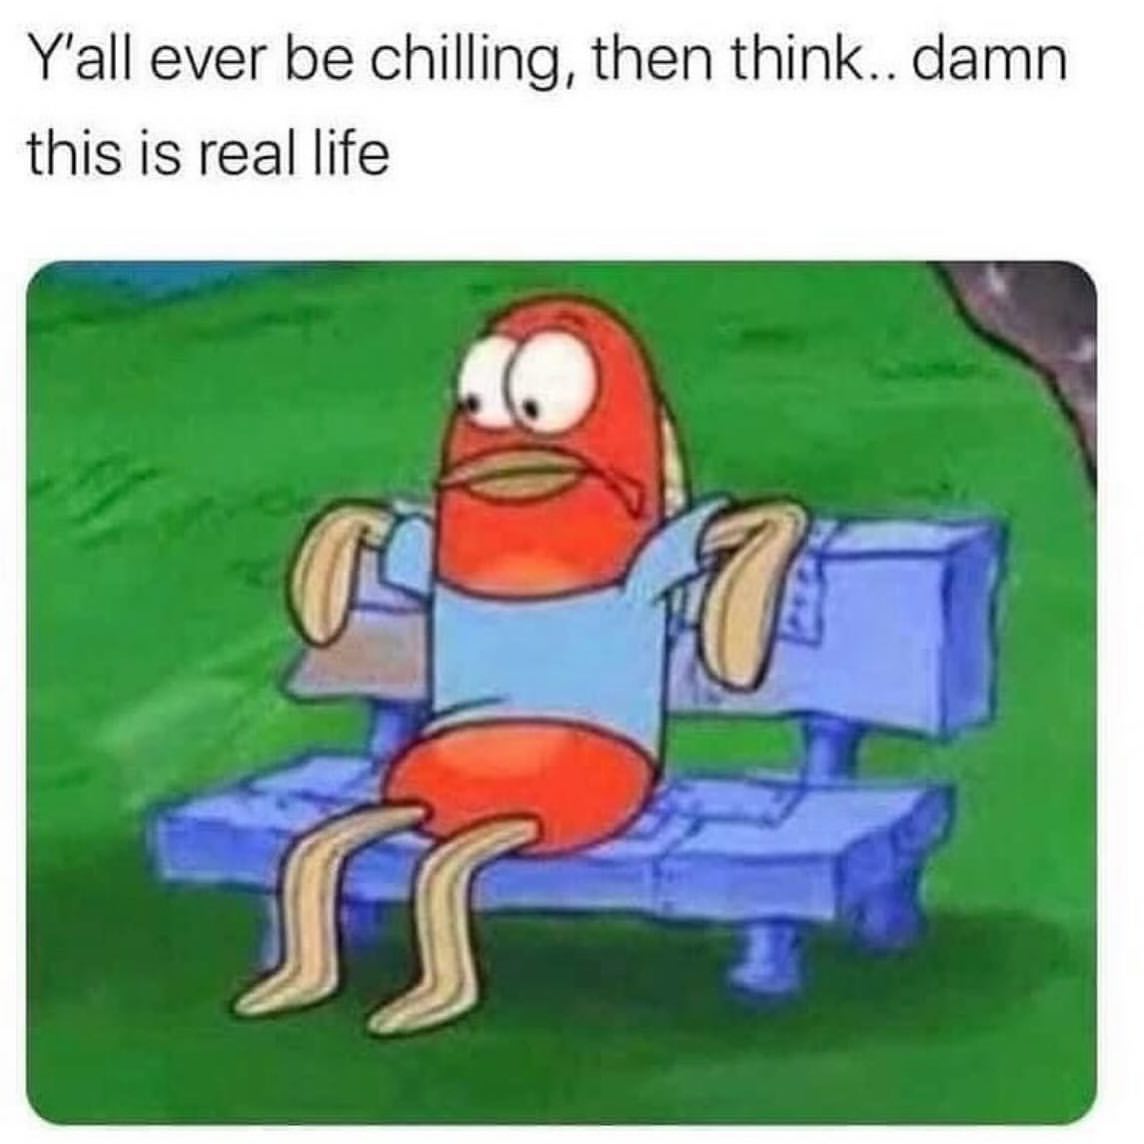 Y'all ever be chilling, then think.. damn this is real life.